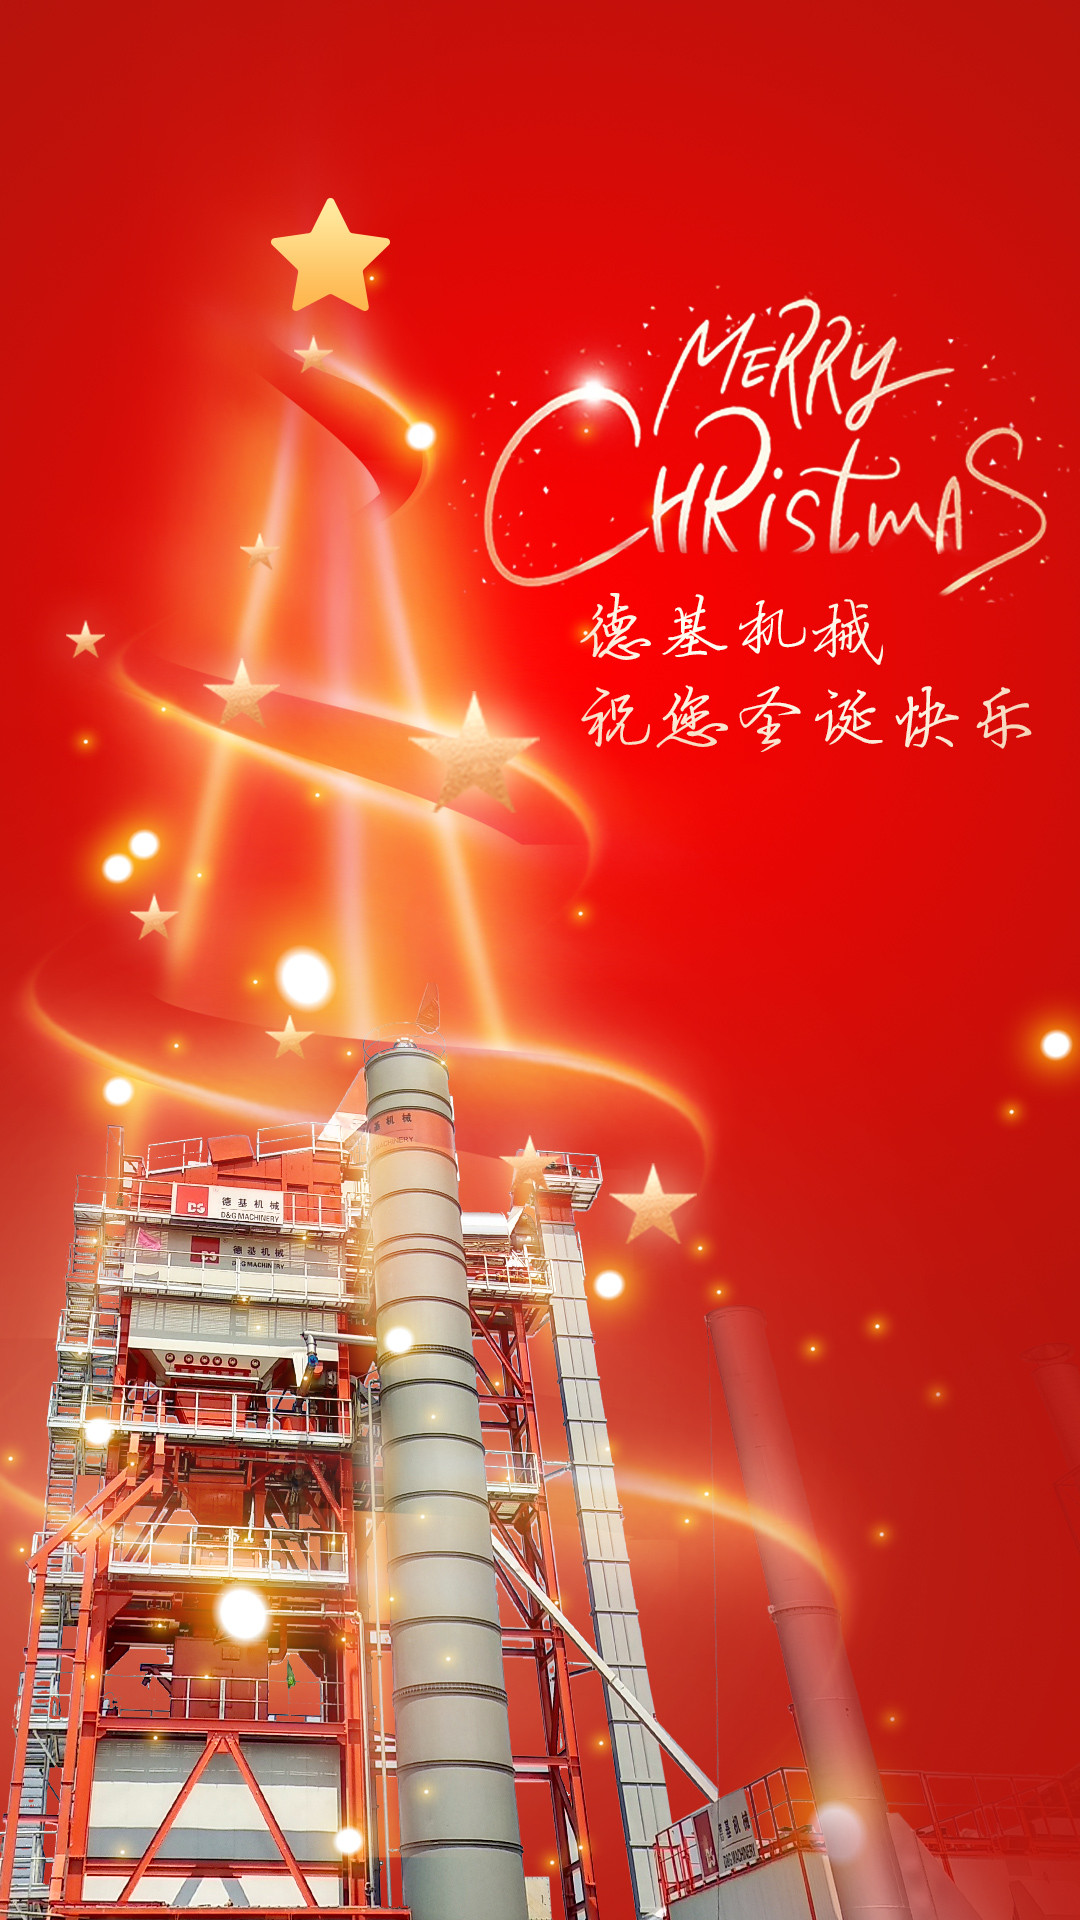 Merry Christmas best wishes from D&G Machinery